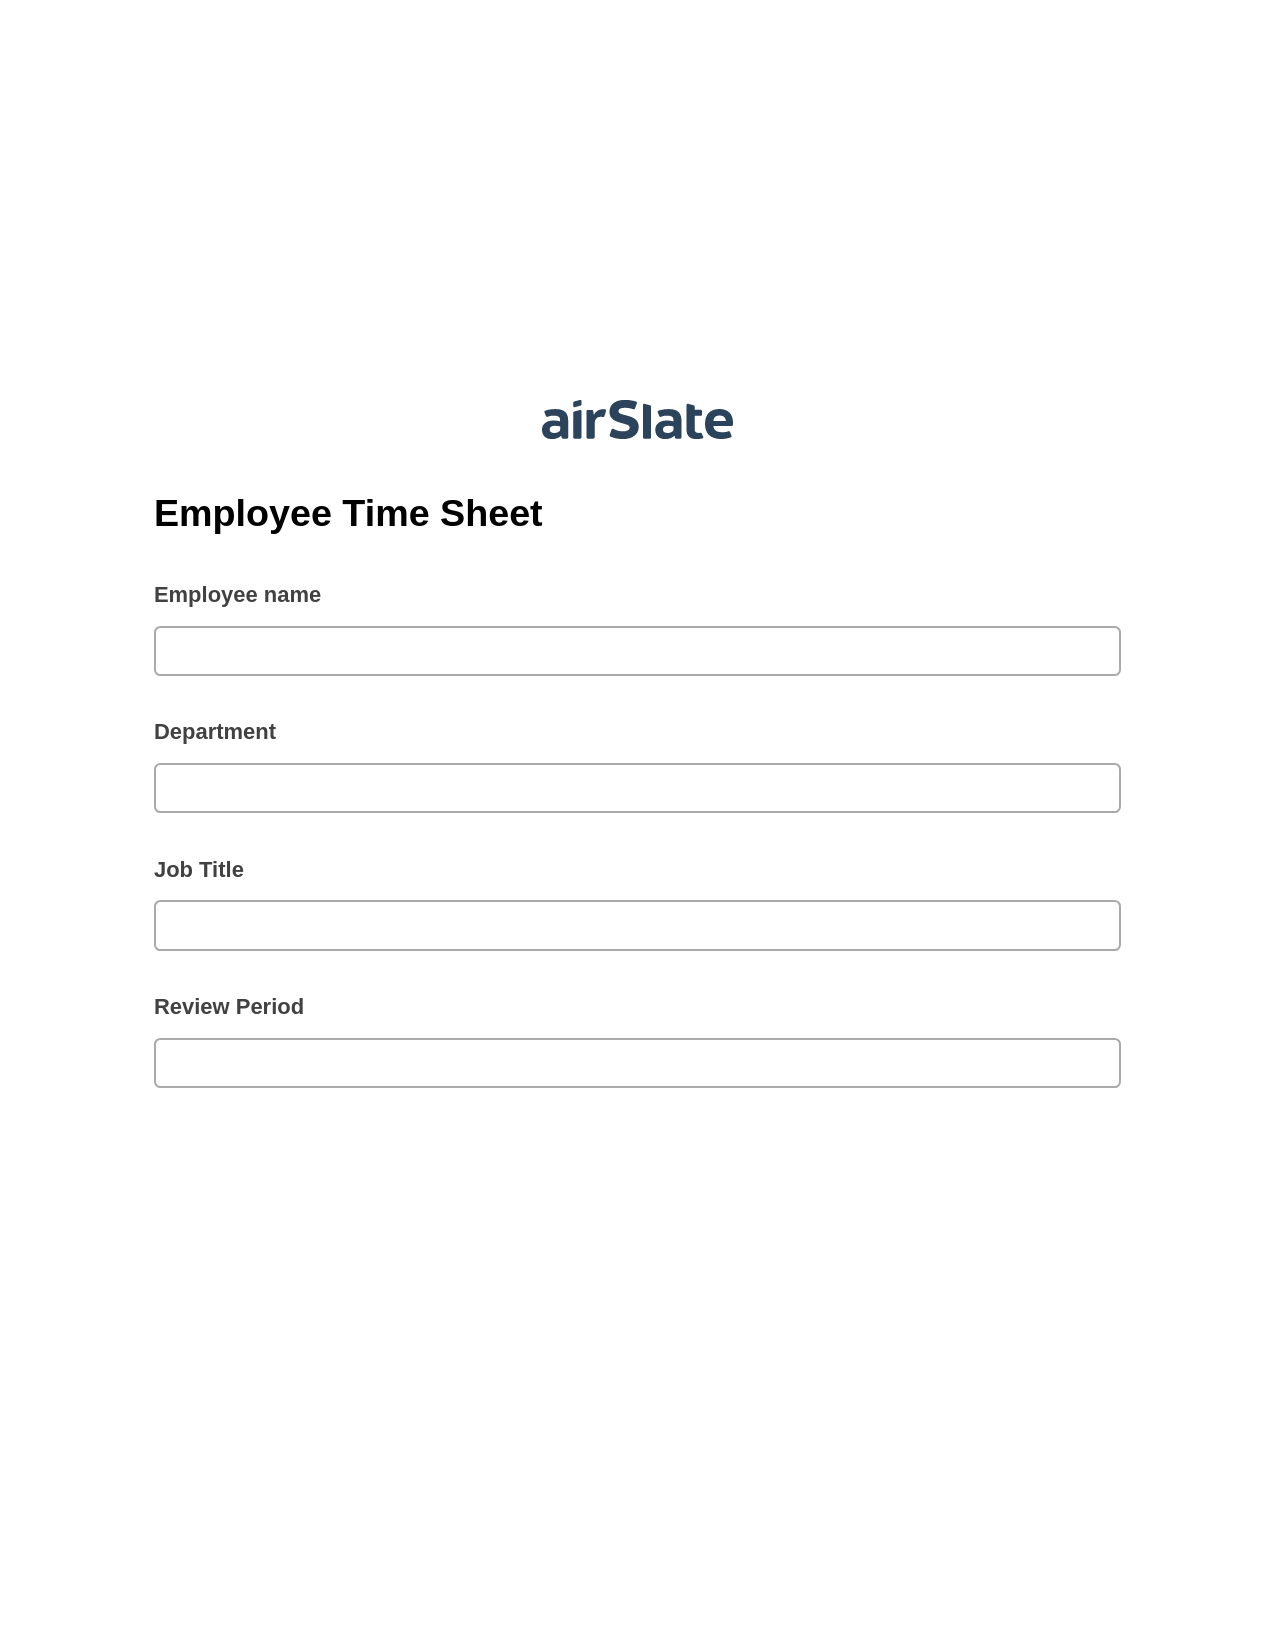 Employee Time Sheet Pre-fill from another Slate Bot, Update Audit Trail Bot, Archive to Box Bot